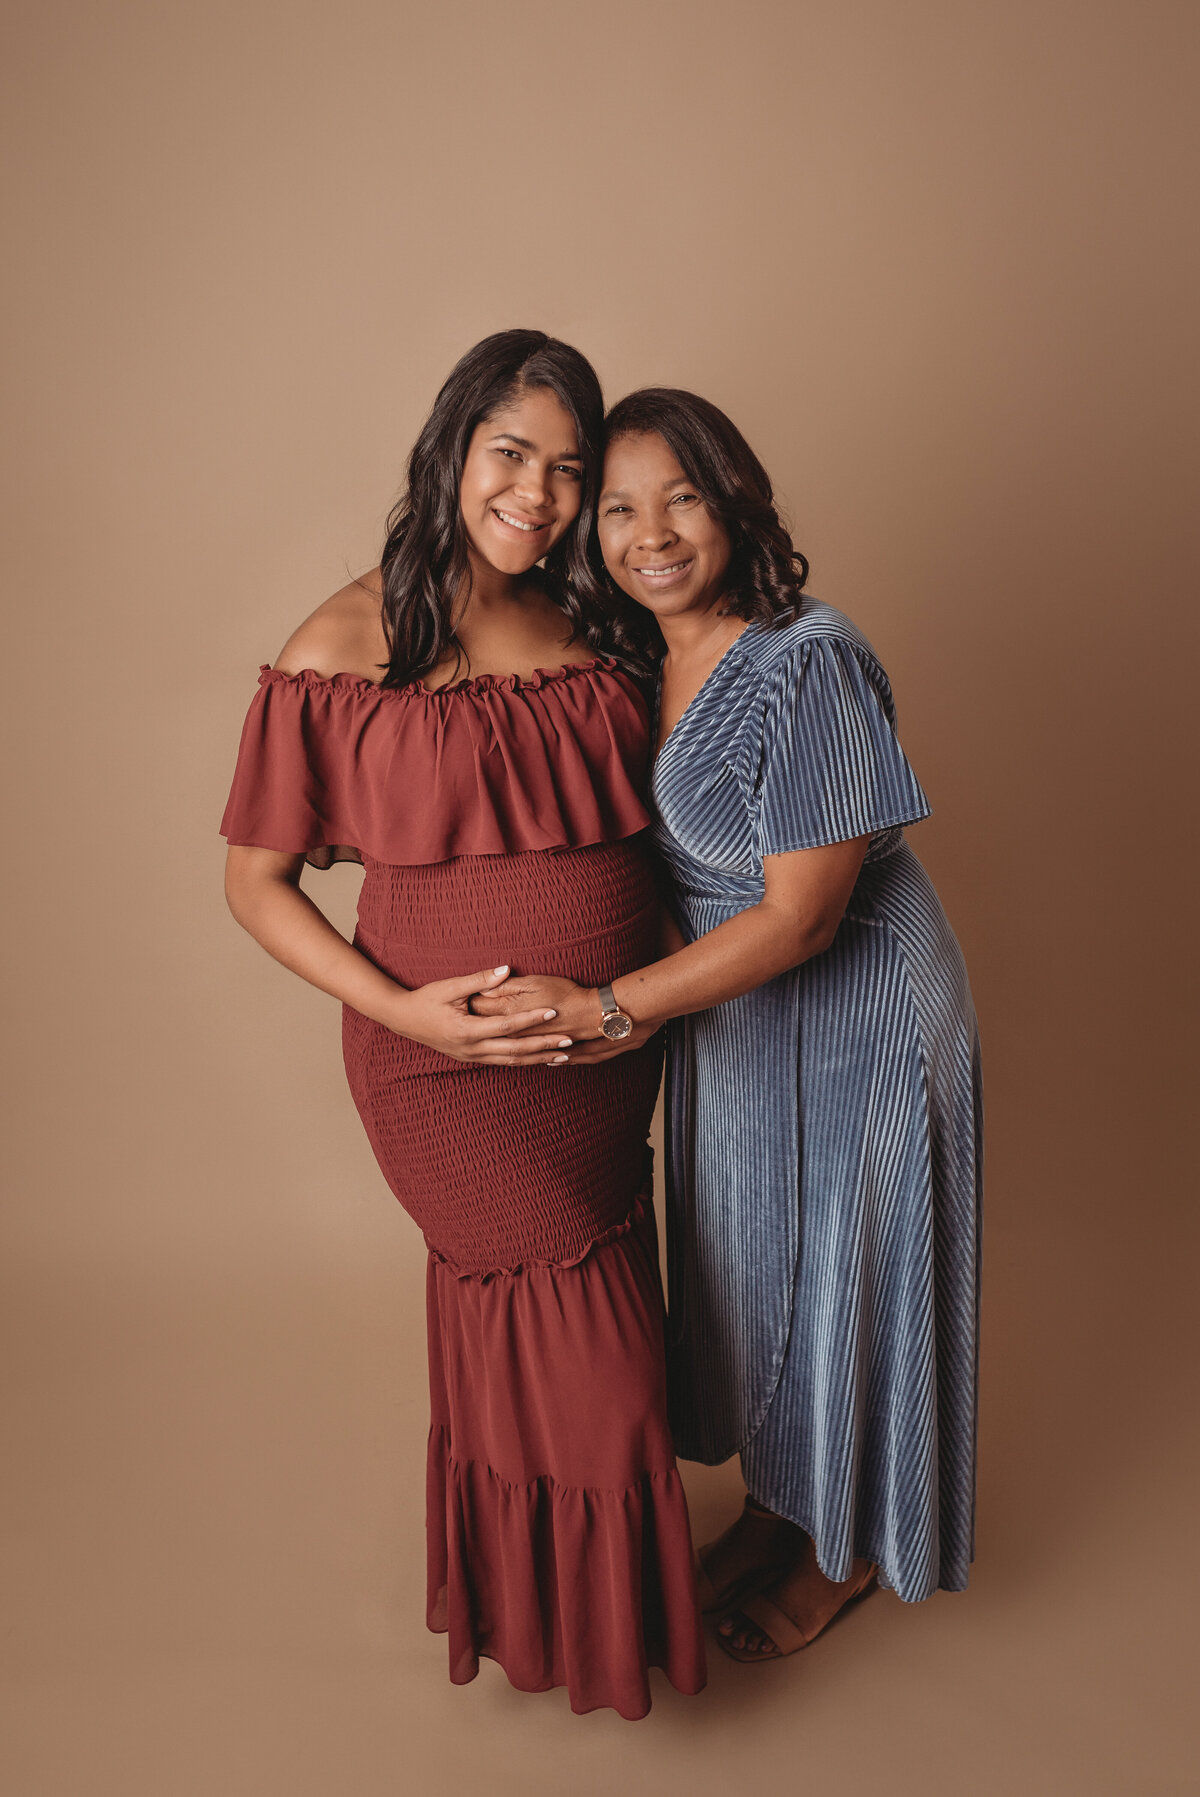 Pregnancy picture with mom to be and her mom. Mom to be is wearing a burgundy dress and her mom is wearing a blue velvet wrap dress.